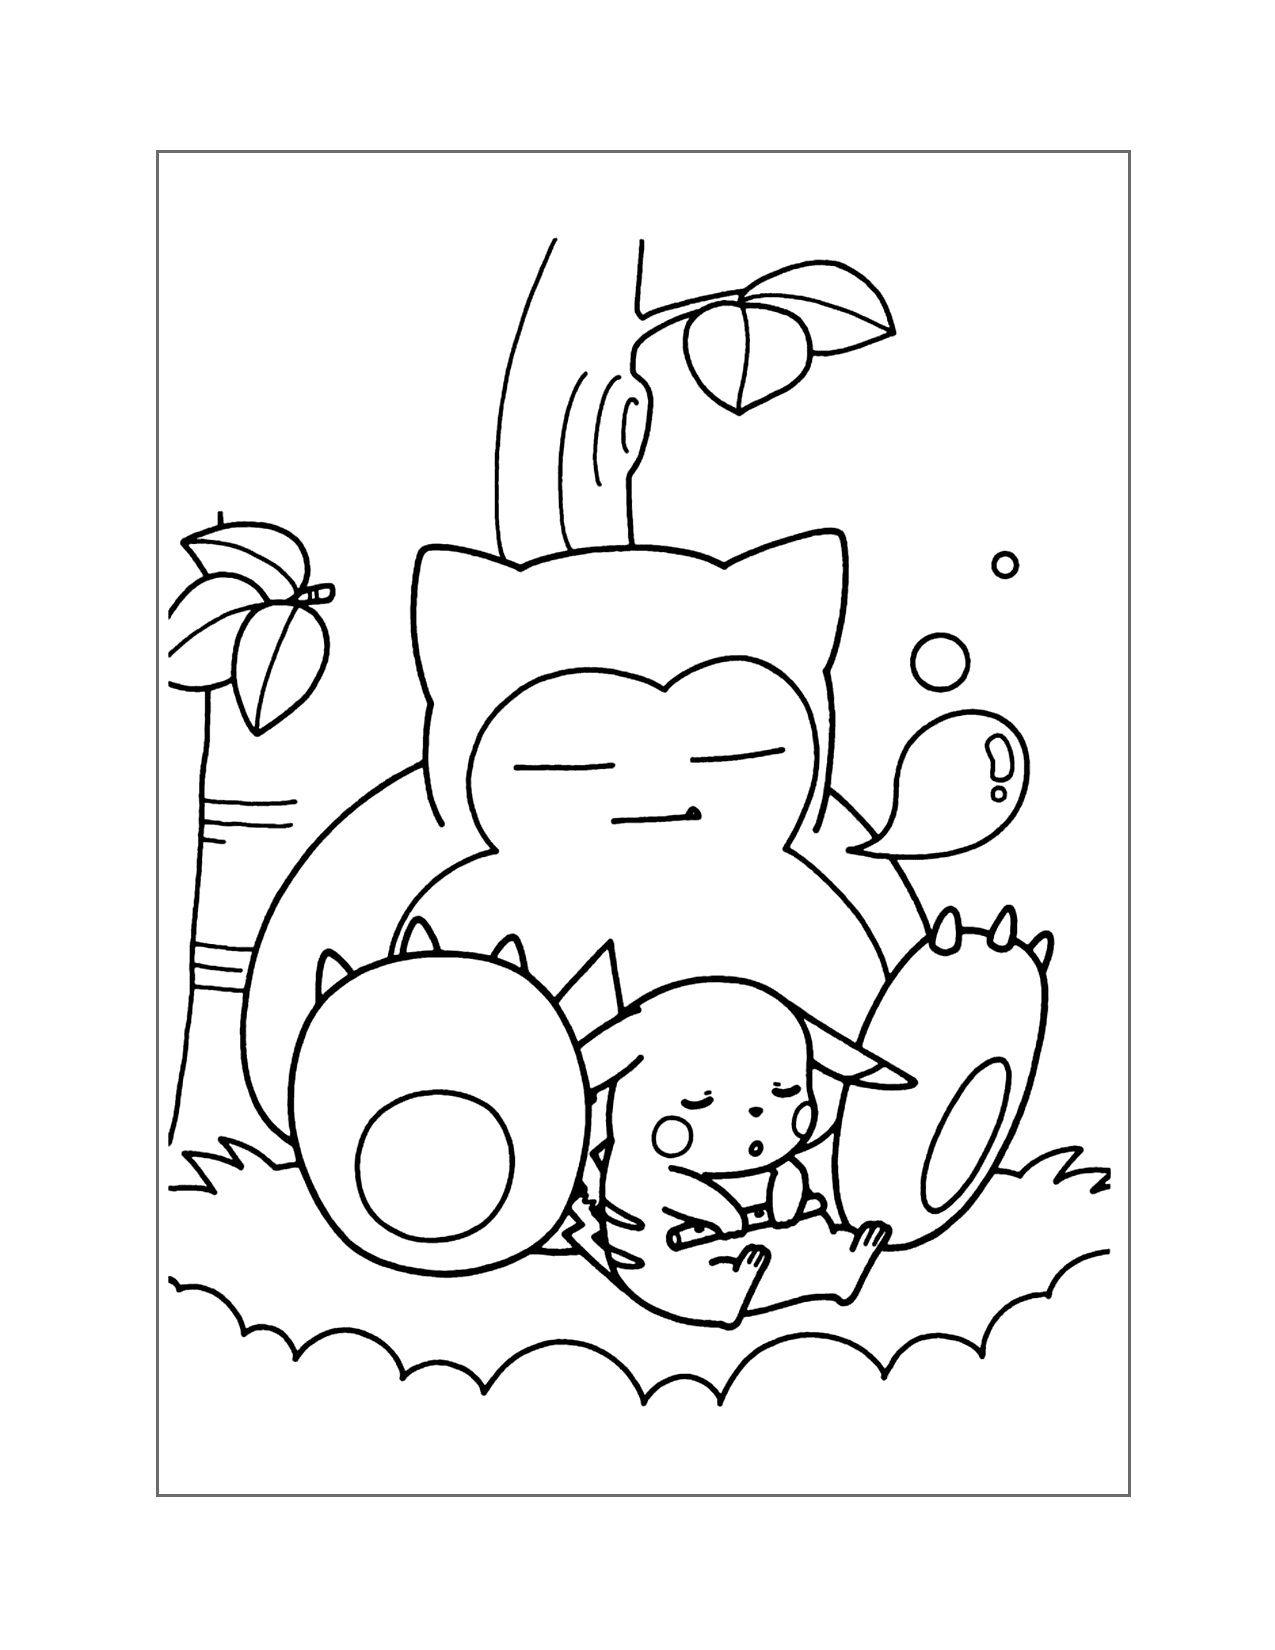 Pikachu And Snorlax Sleeping Coloring Page